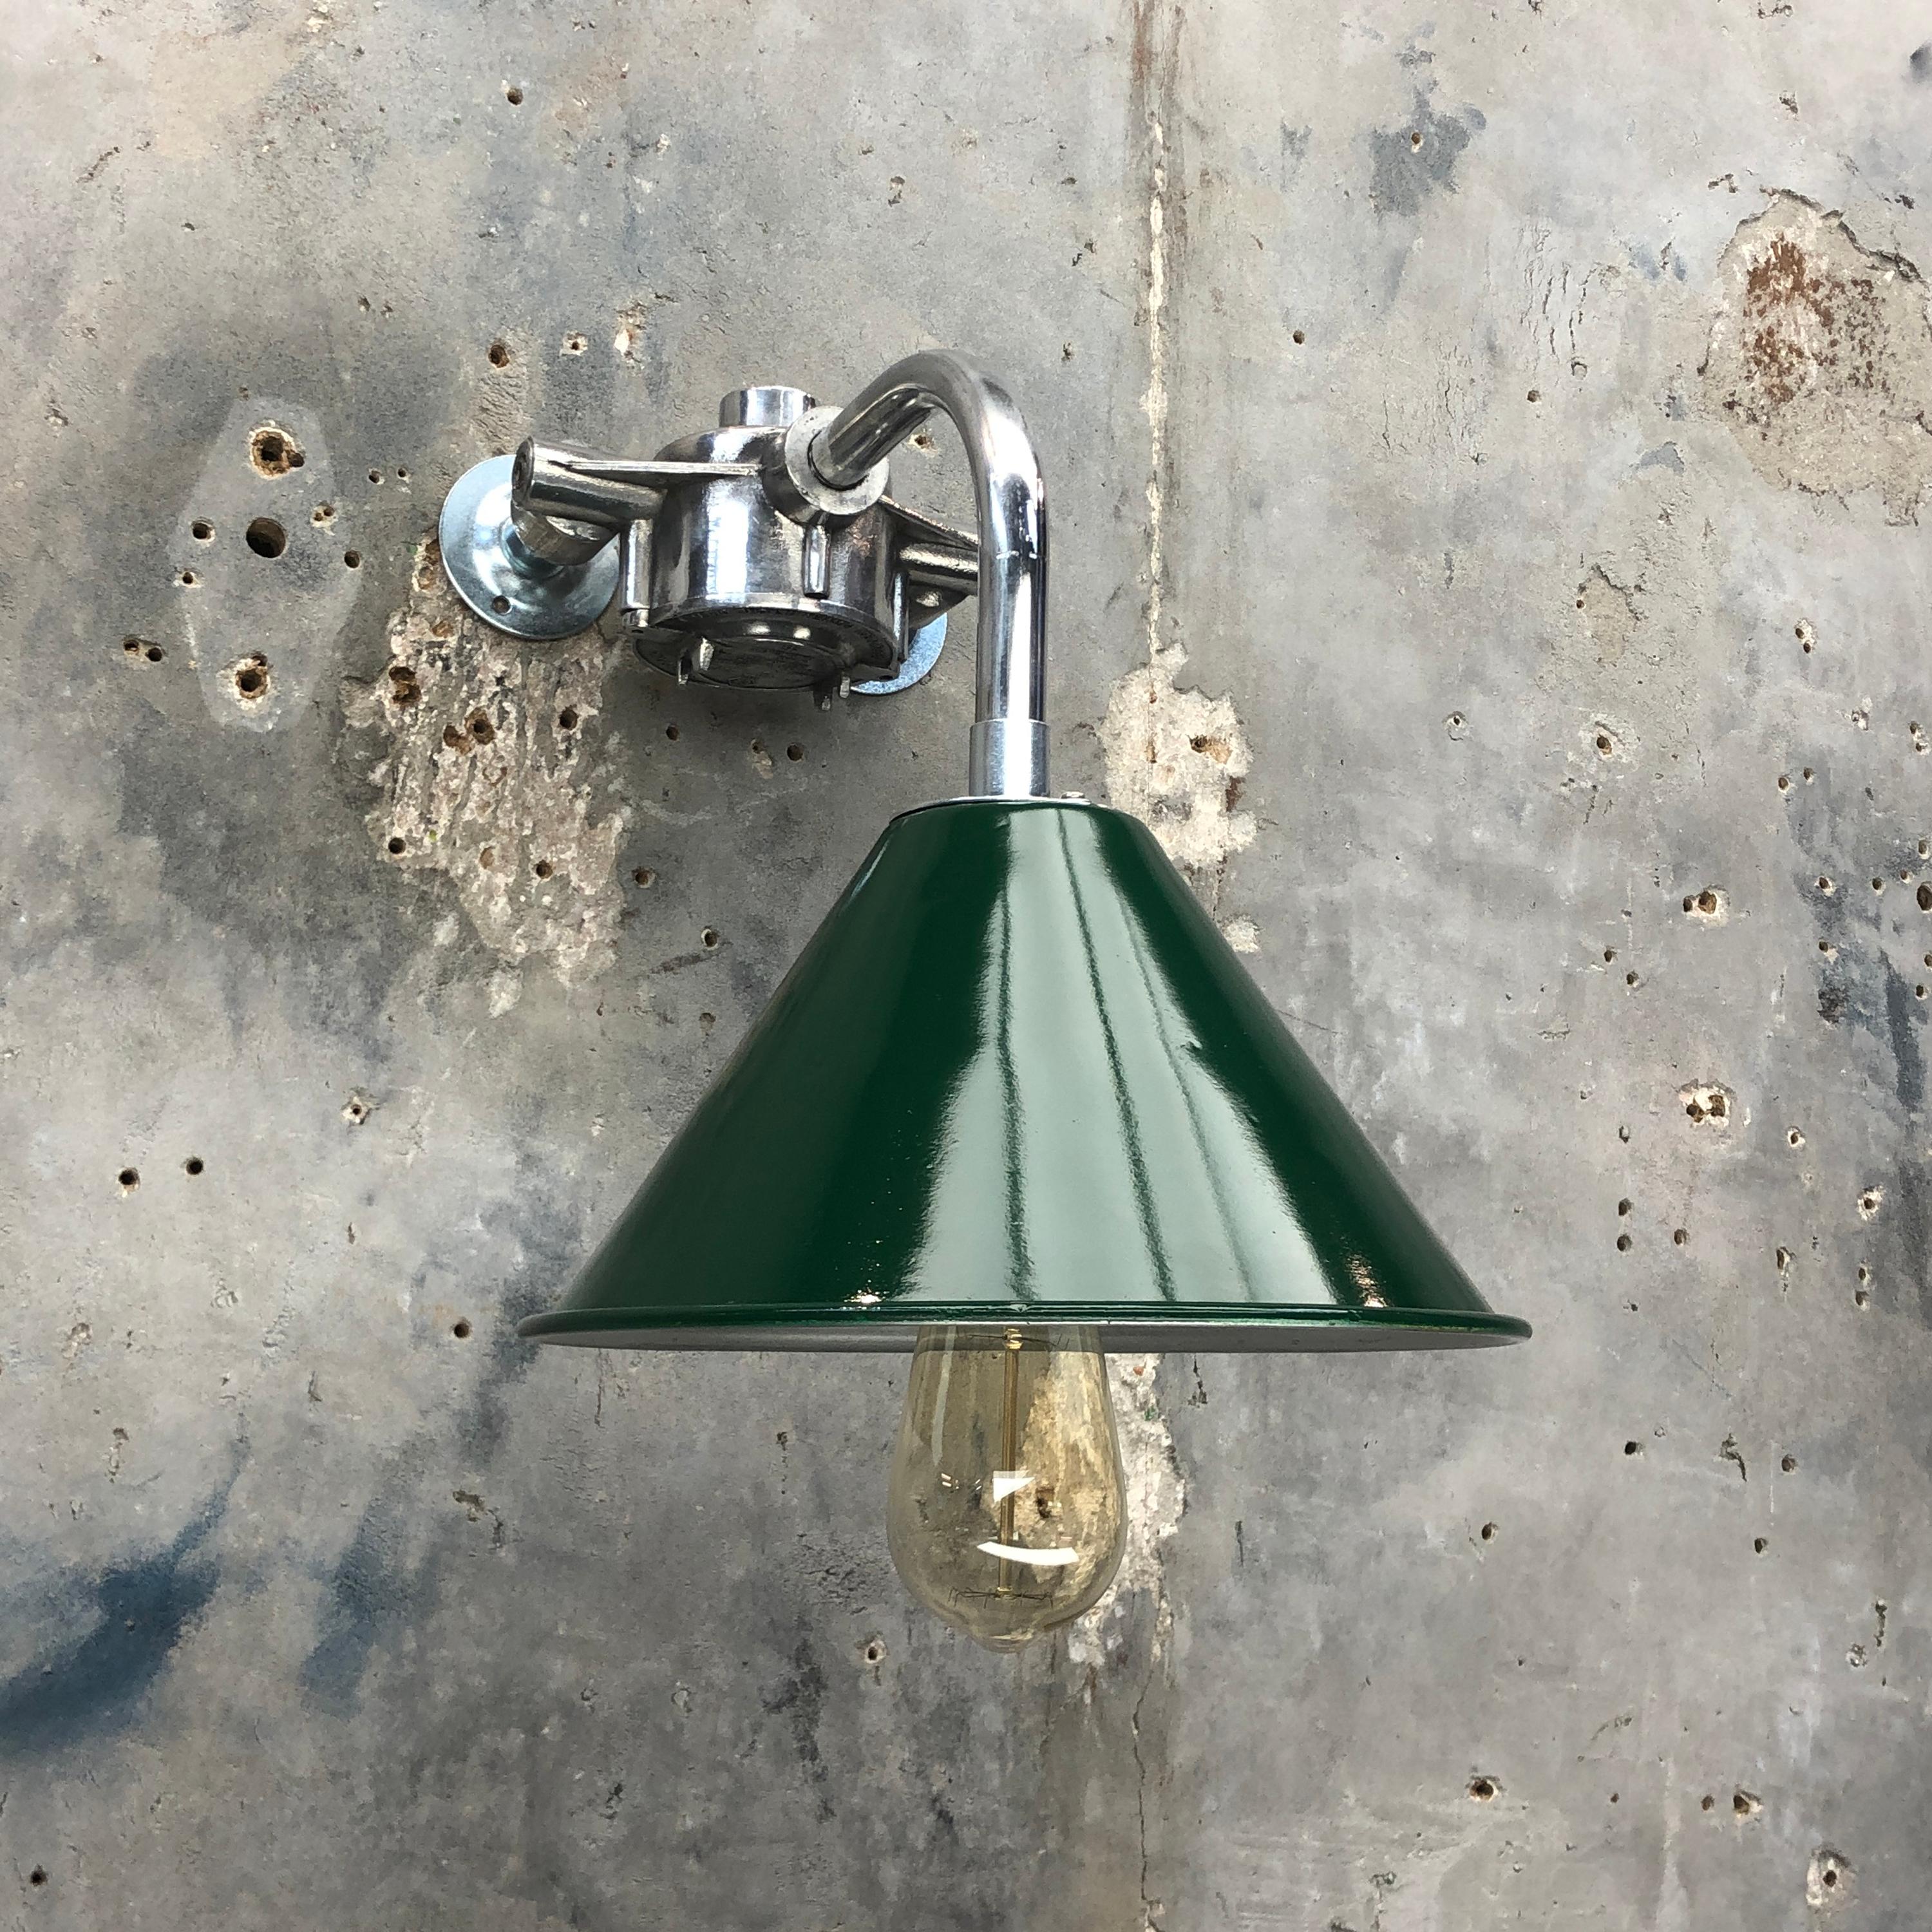 Cast 1980s Ex British Army Lamp Shade and Galvanized Steel Short Reach Cantilever For Sale